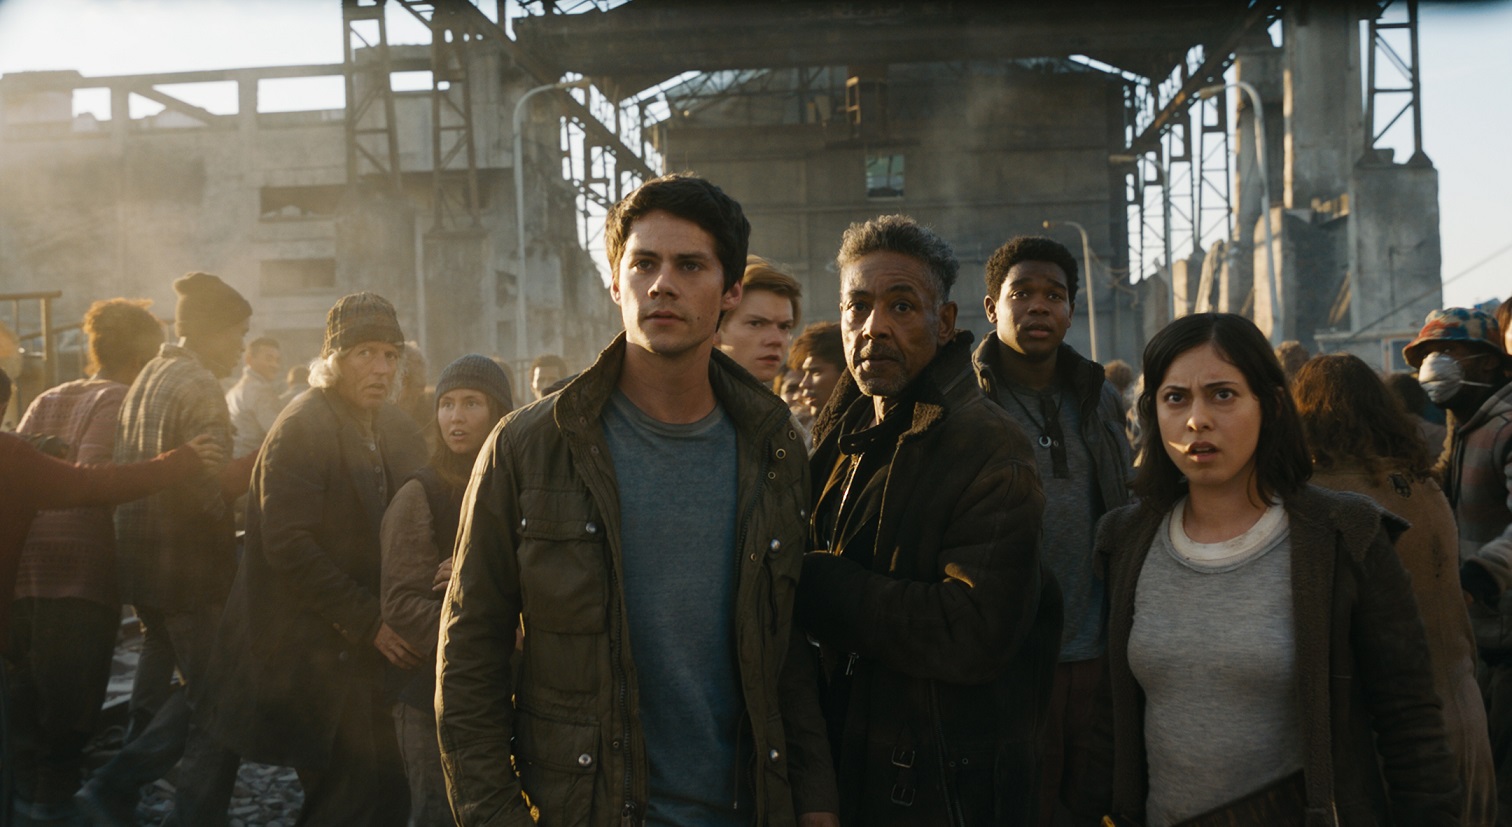 A First Look At Photos And Teaser Trailer Of Maze Runner